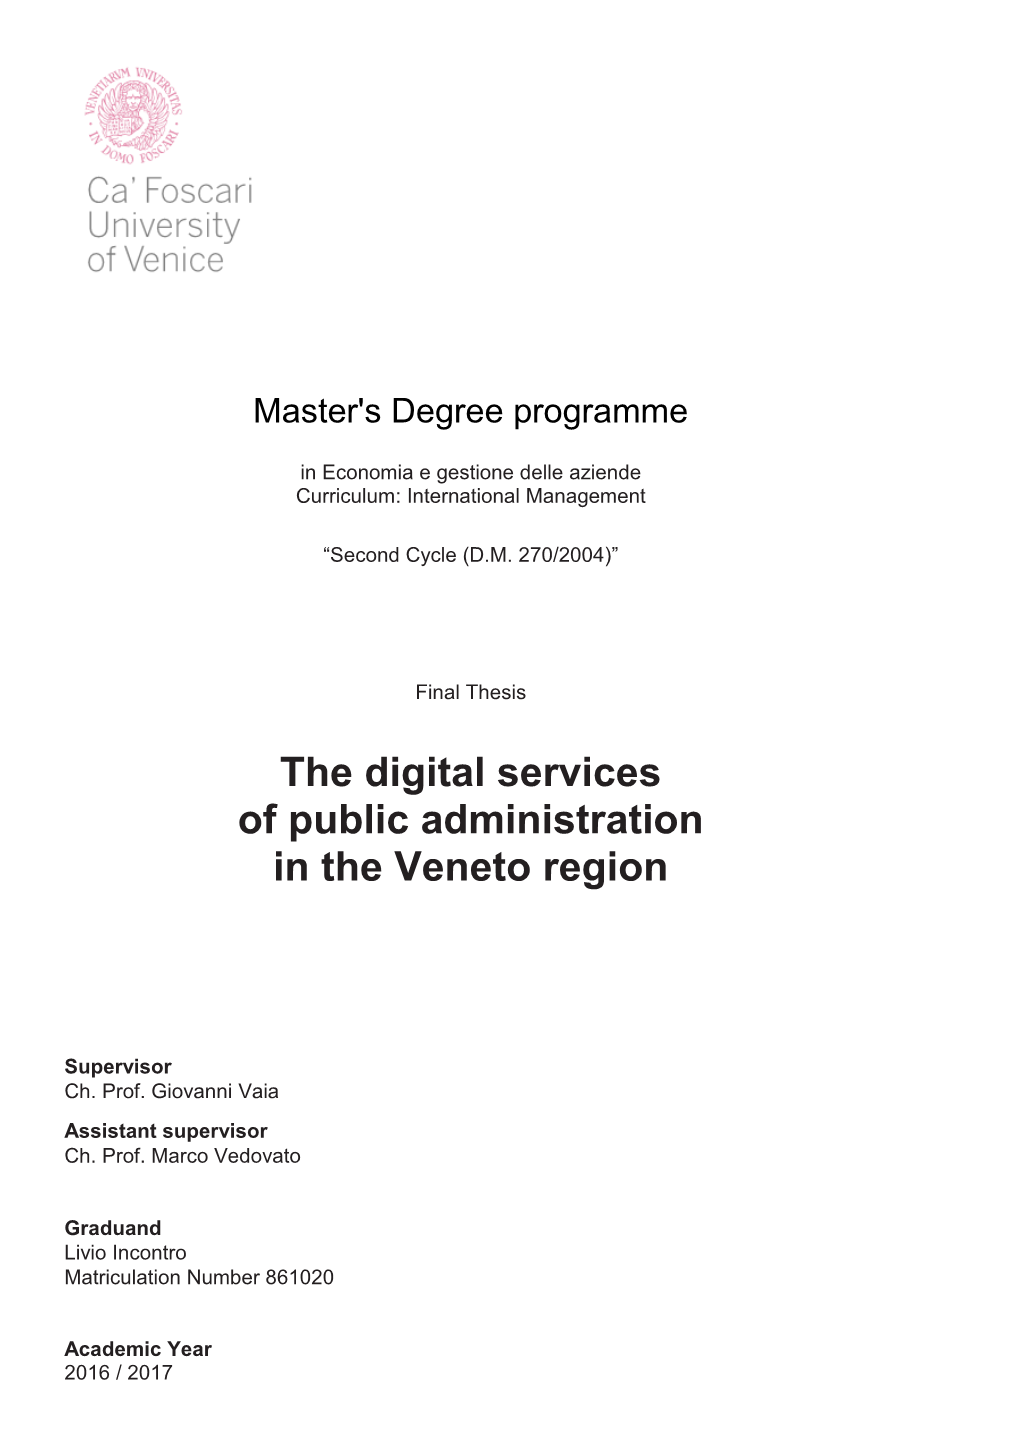 The Digital Services of Public Administration in the Veneto Region